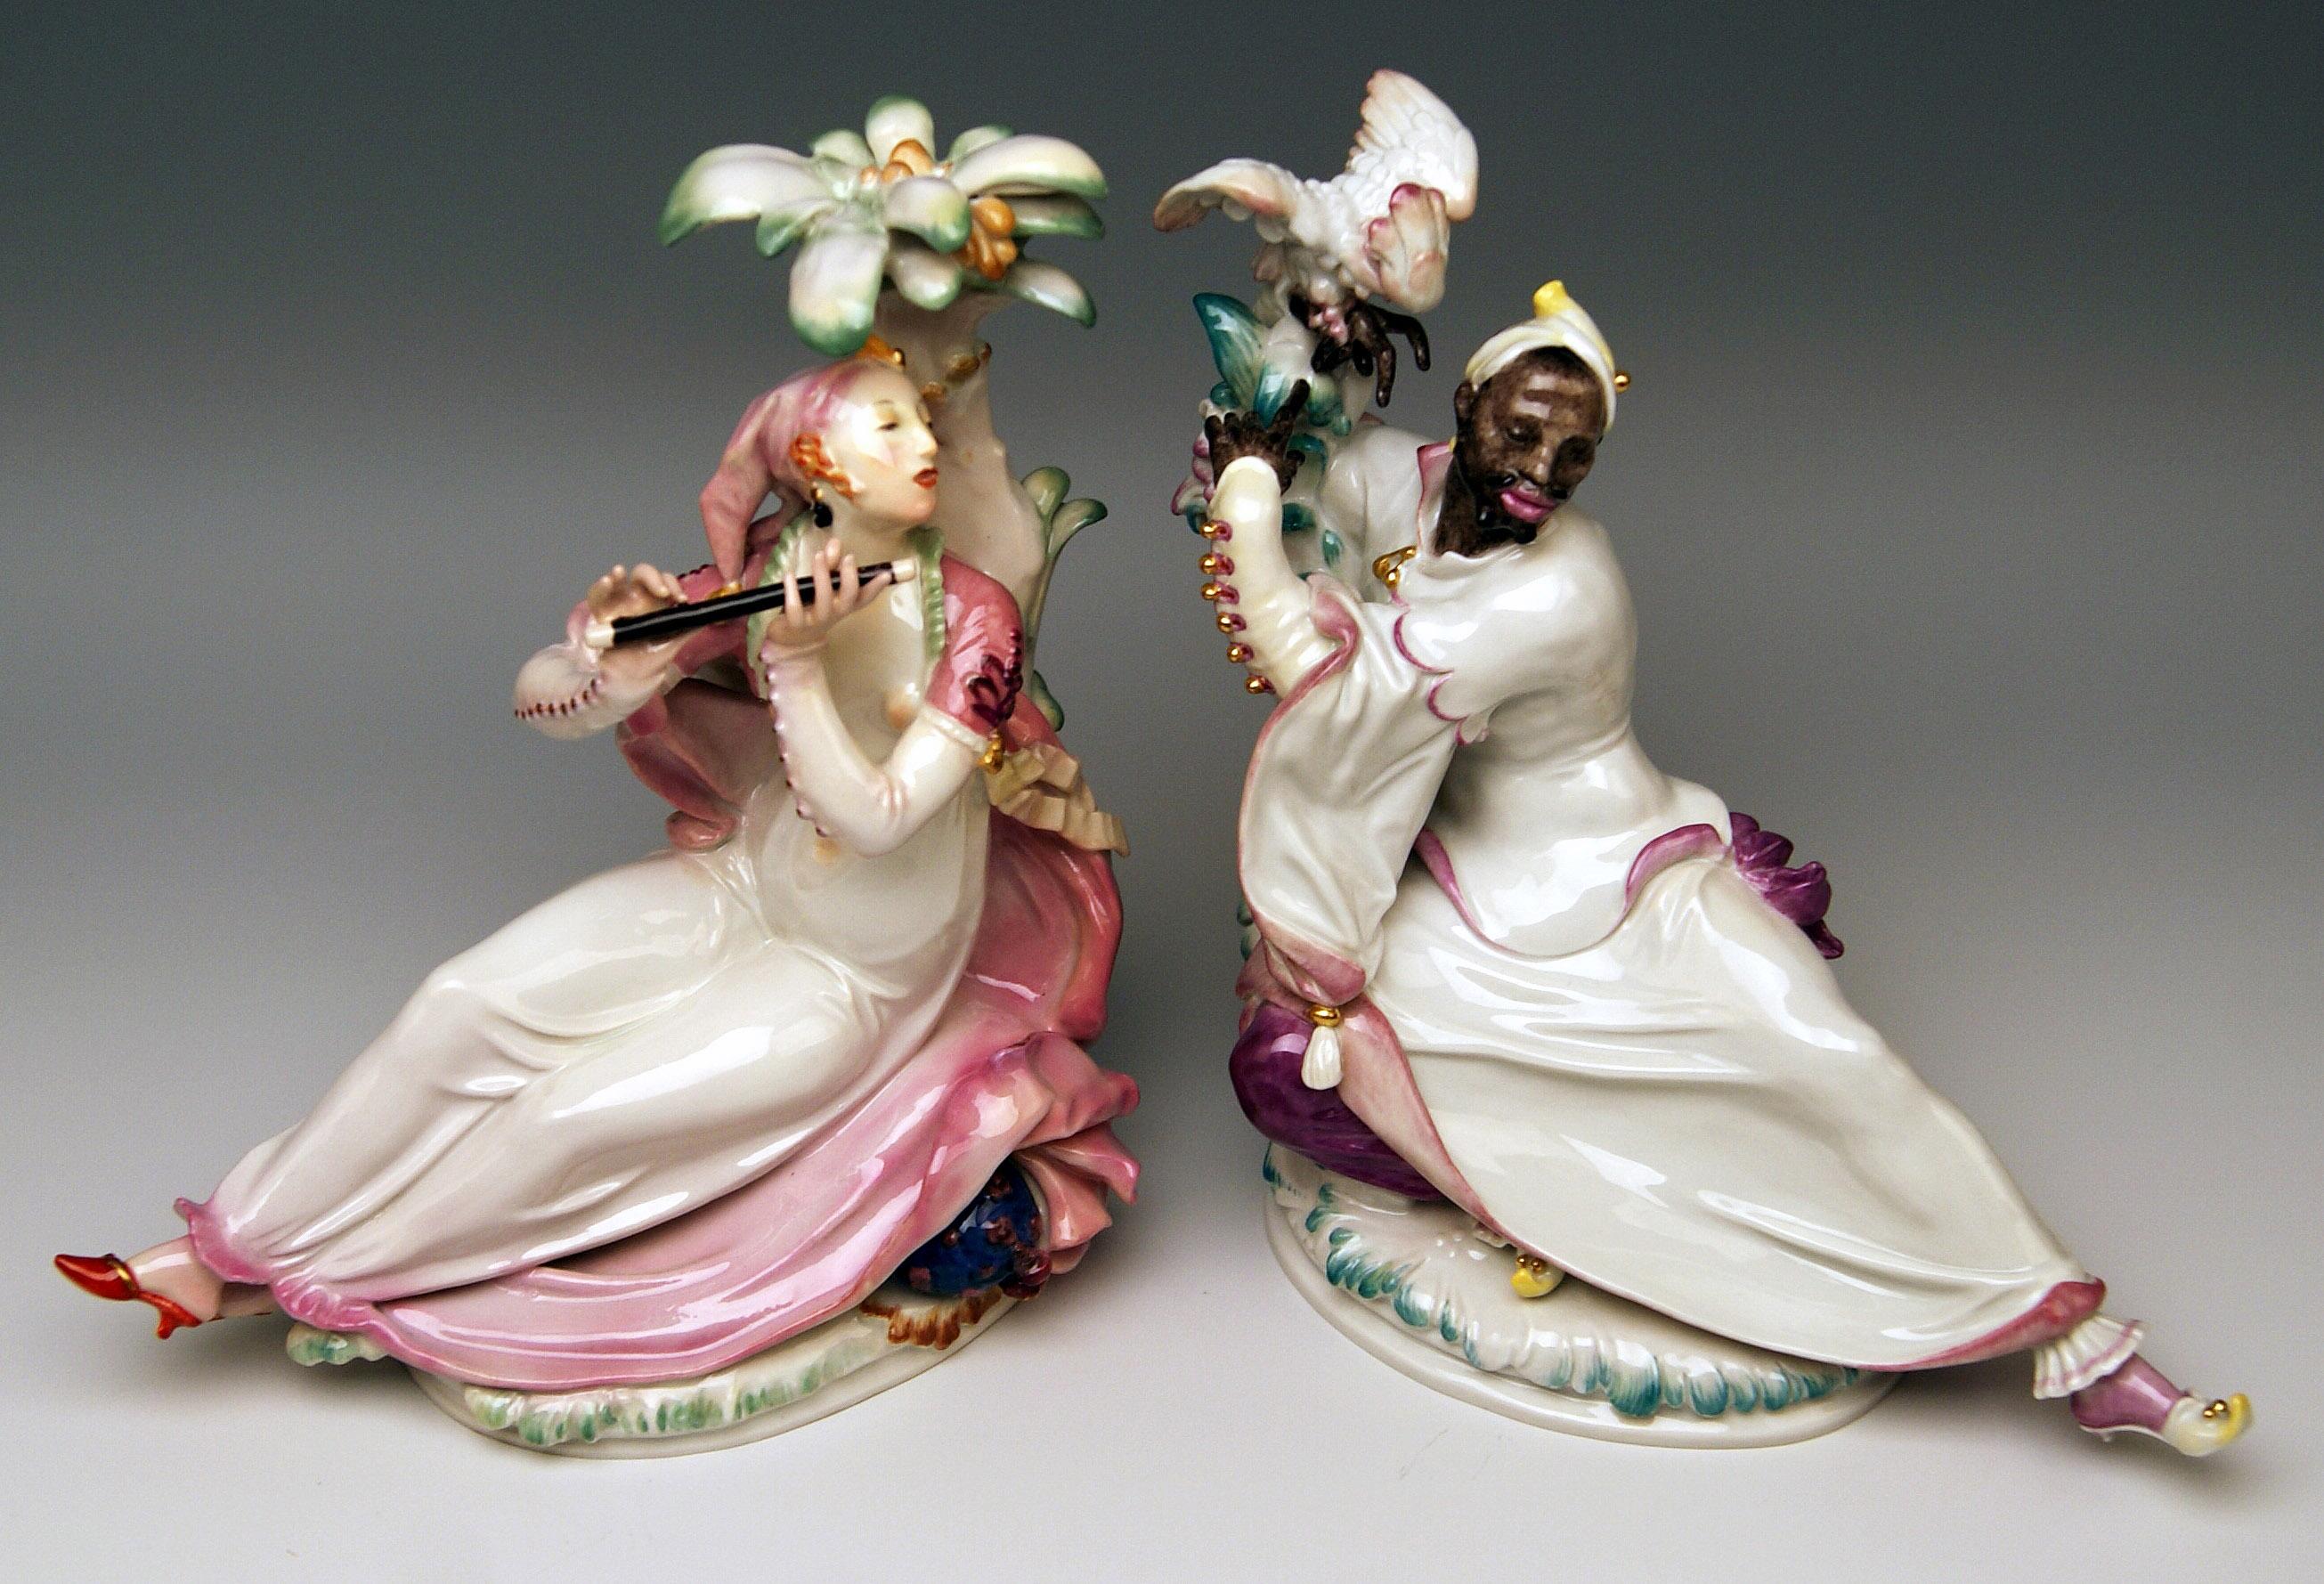 Meissen most remarkable pair of figurines: Designed by Paul Scheurich (1883-1945)
Oriental woman with flute / modelled 1926
Black man with cockatoo / modelled 1922.

Size:
Female flute player:
Height  8.66 inches / 22.0 cm
Width 7.87 inches /